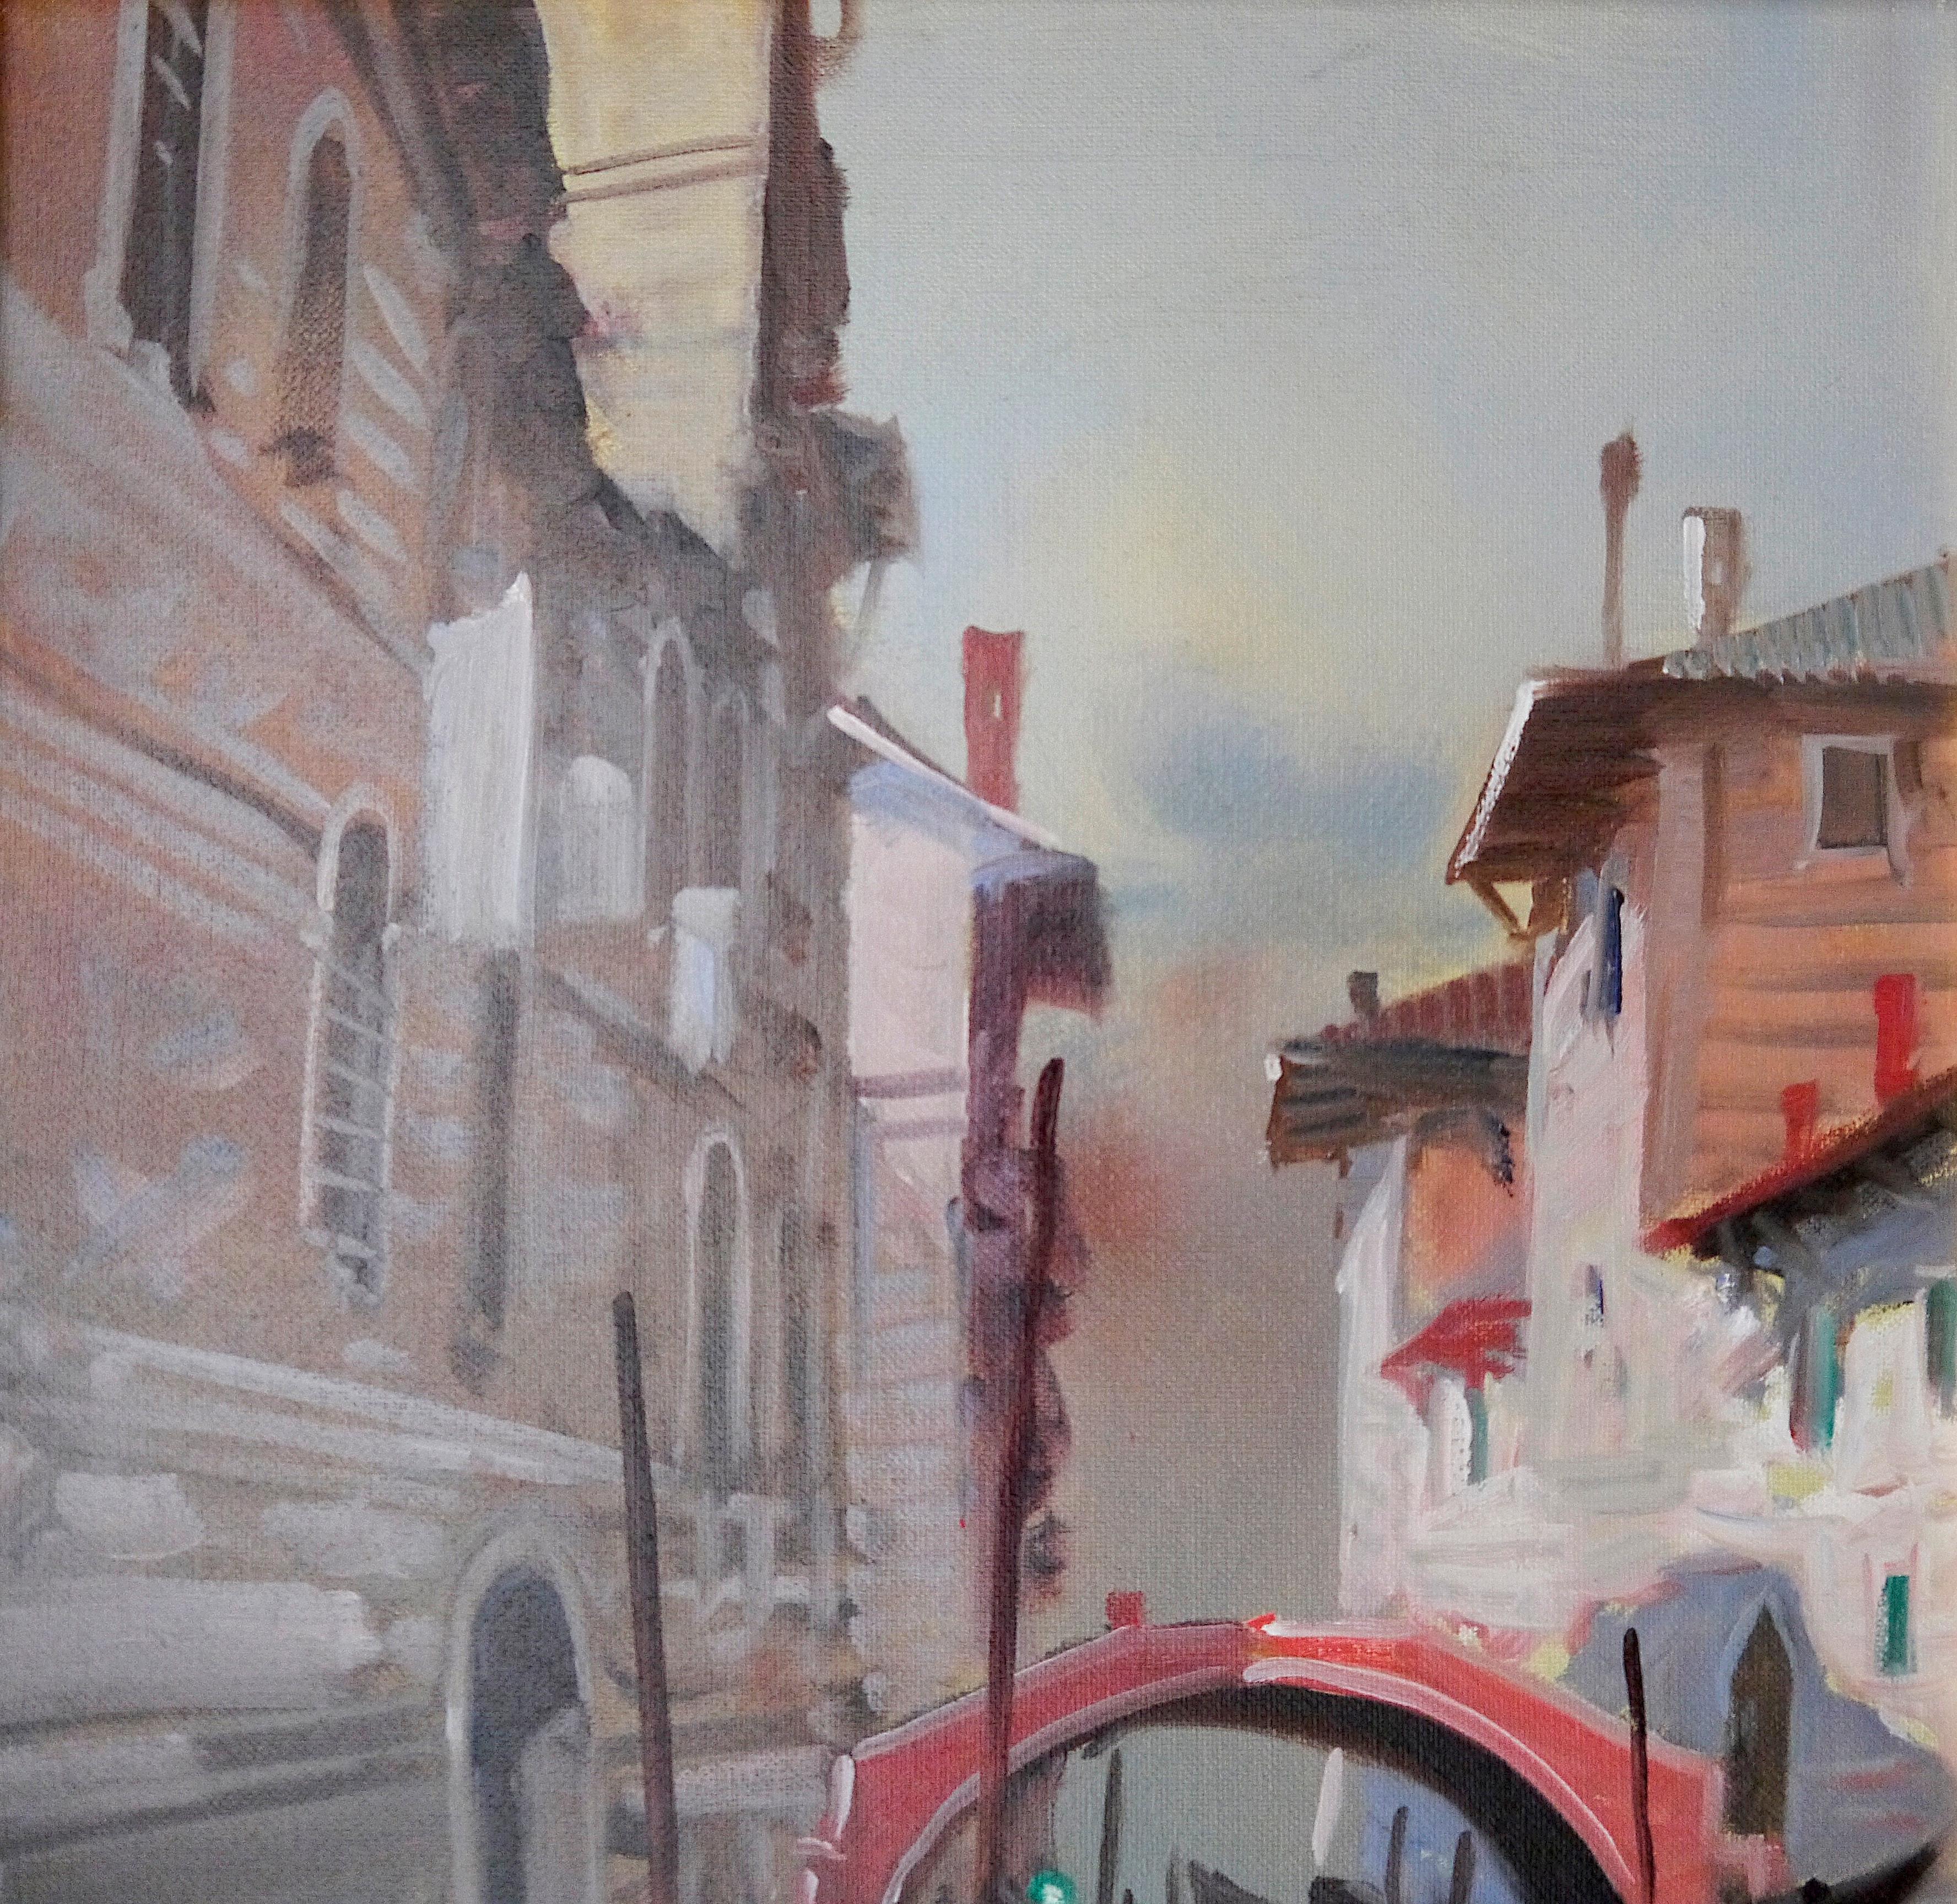 Landscape _ Venice - from A. Marangoni

A. Marangoni is an Italian painter (born in XIX) who worked in the twentieth century. Talented artist from Turin who studied in Paris, Vienna and London. He loved to travel but spent most of his life in